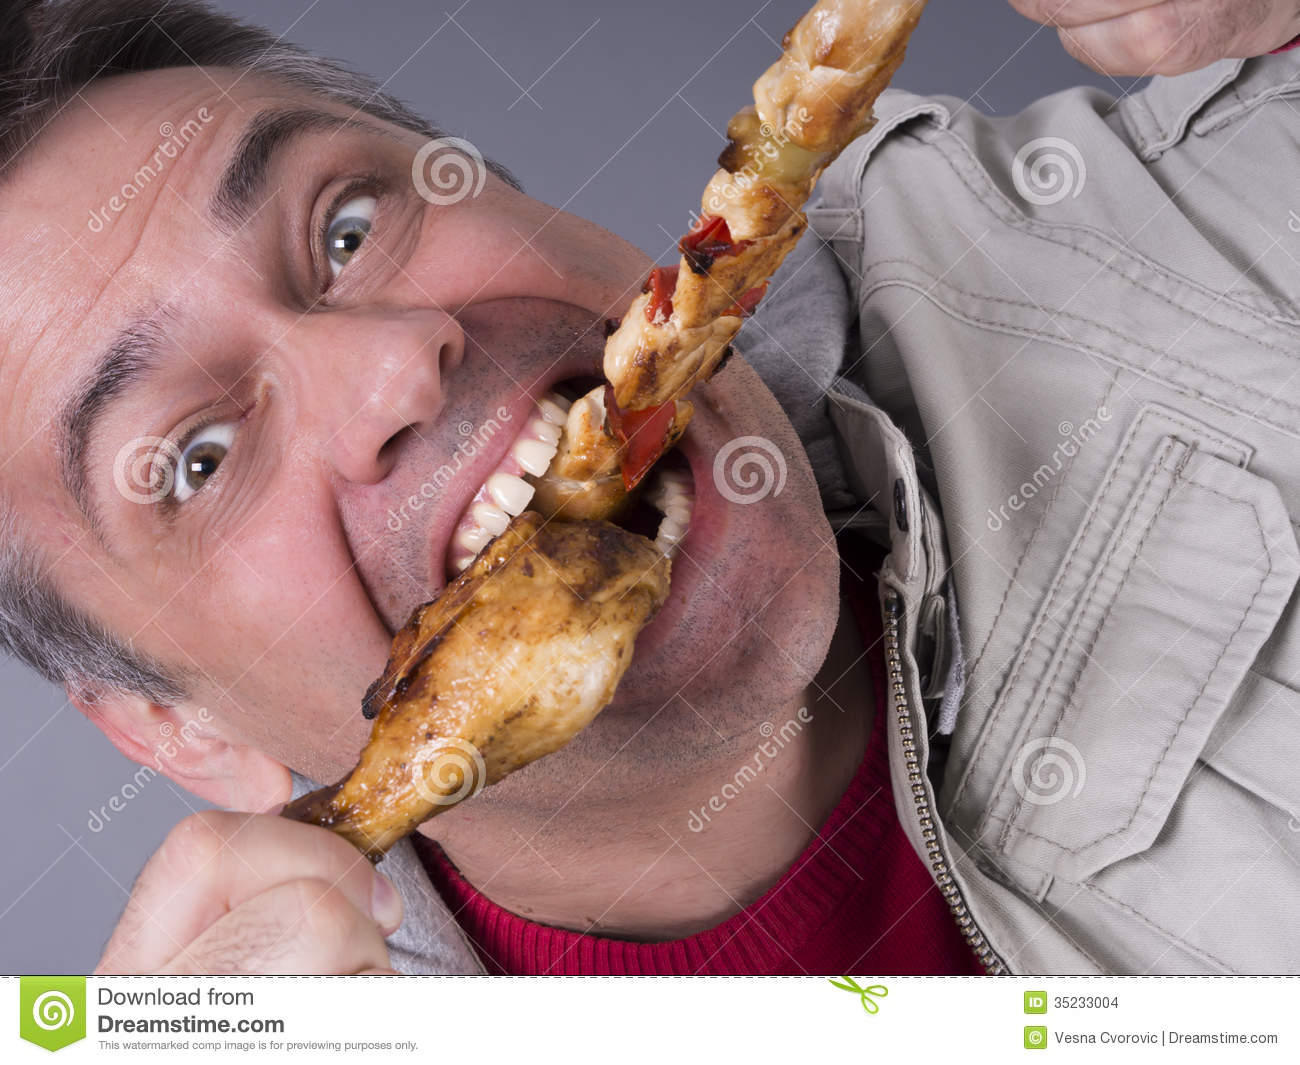 Hungry Meat Eating Man No Diet Stock Images   Image  35233004